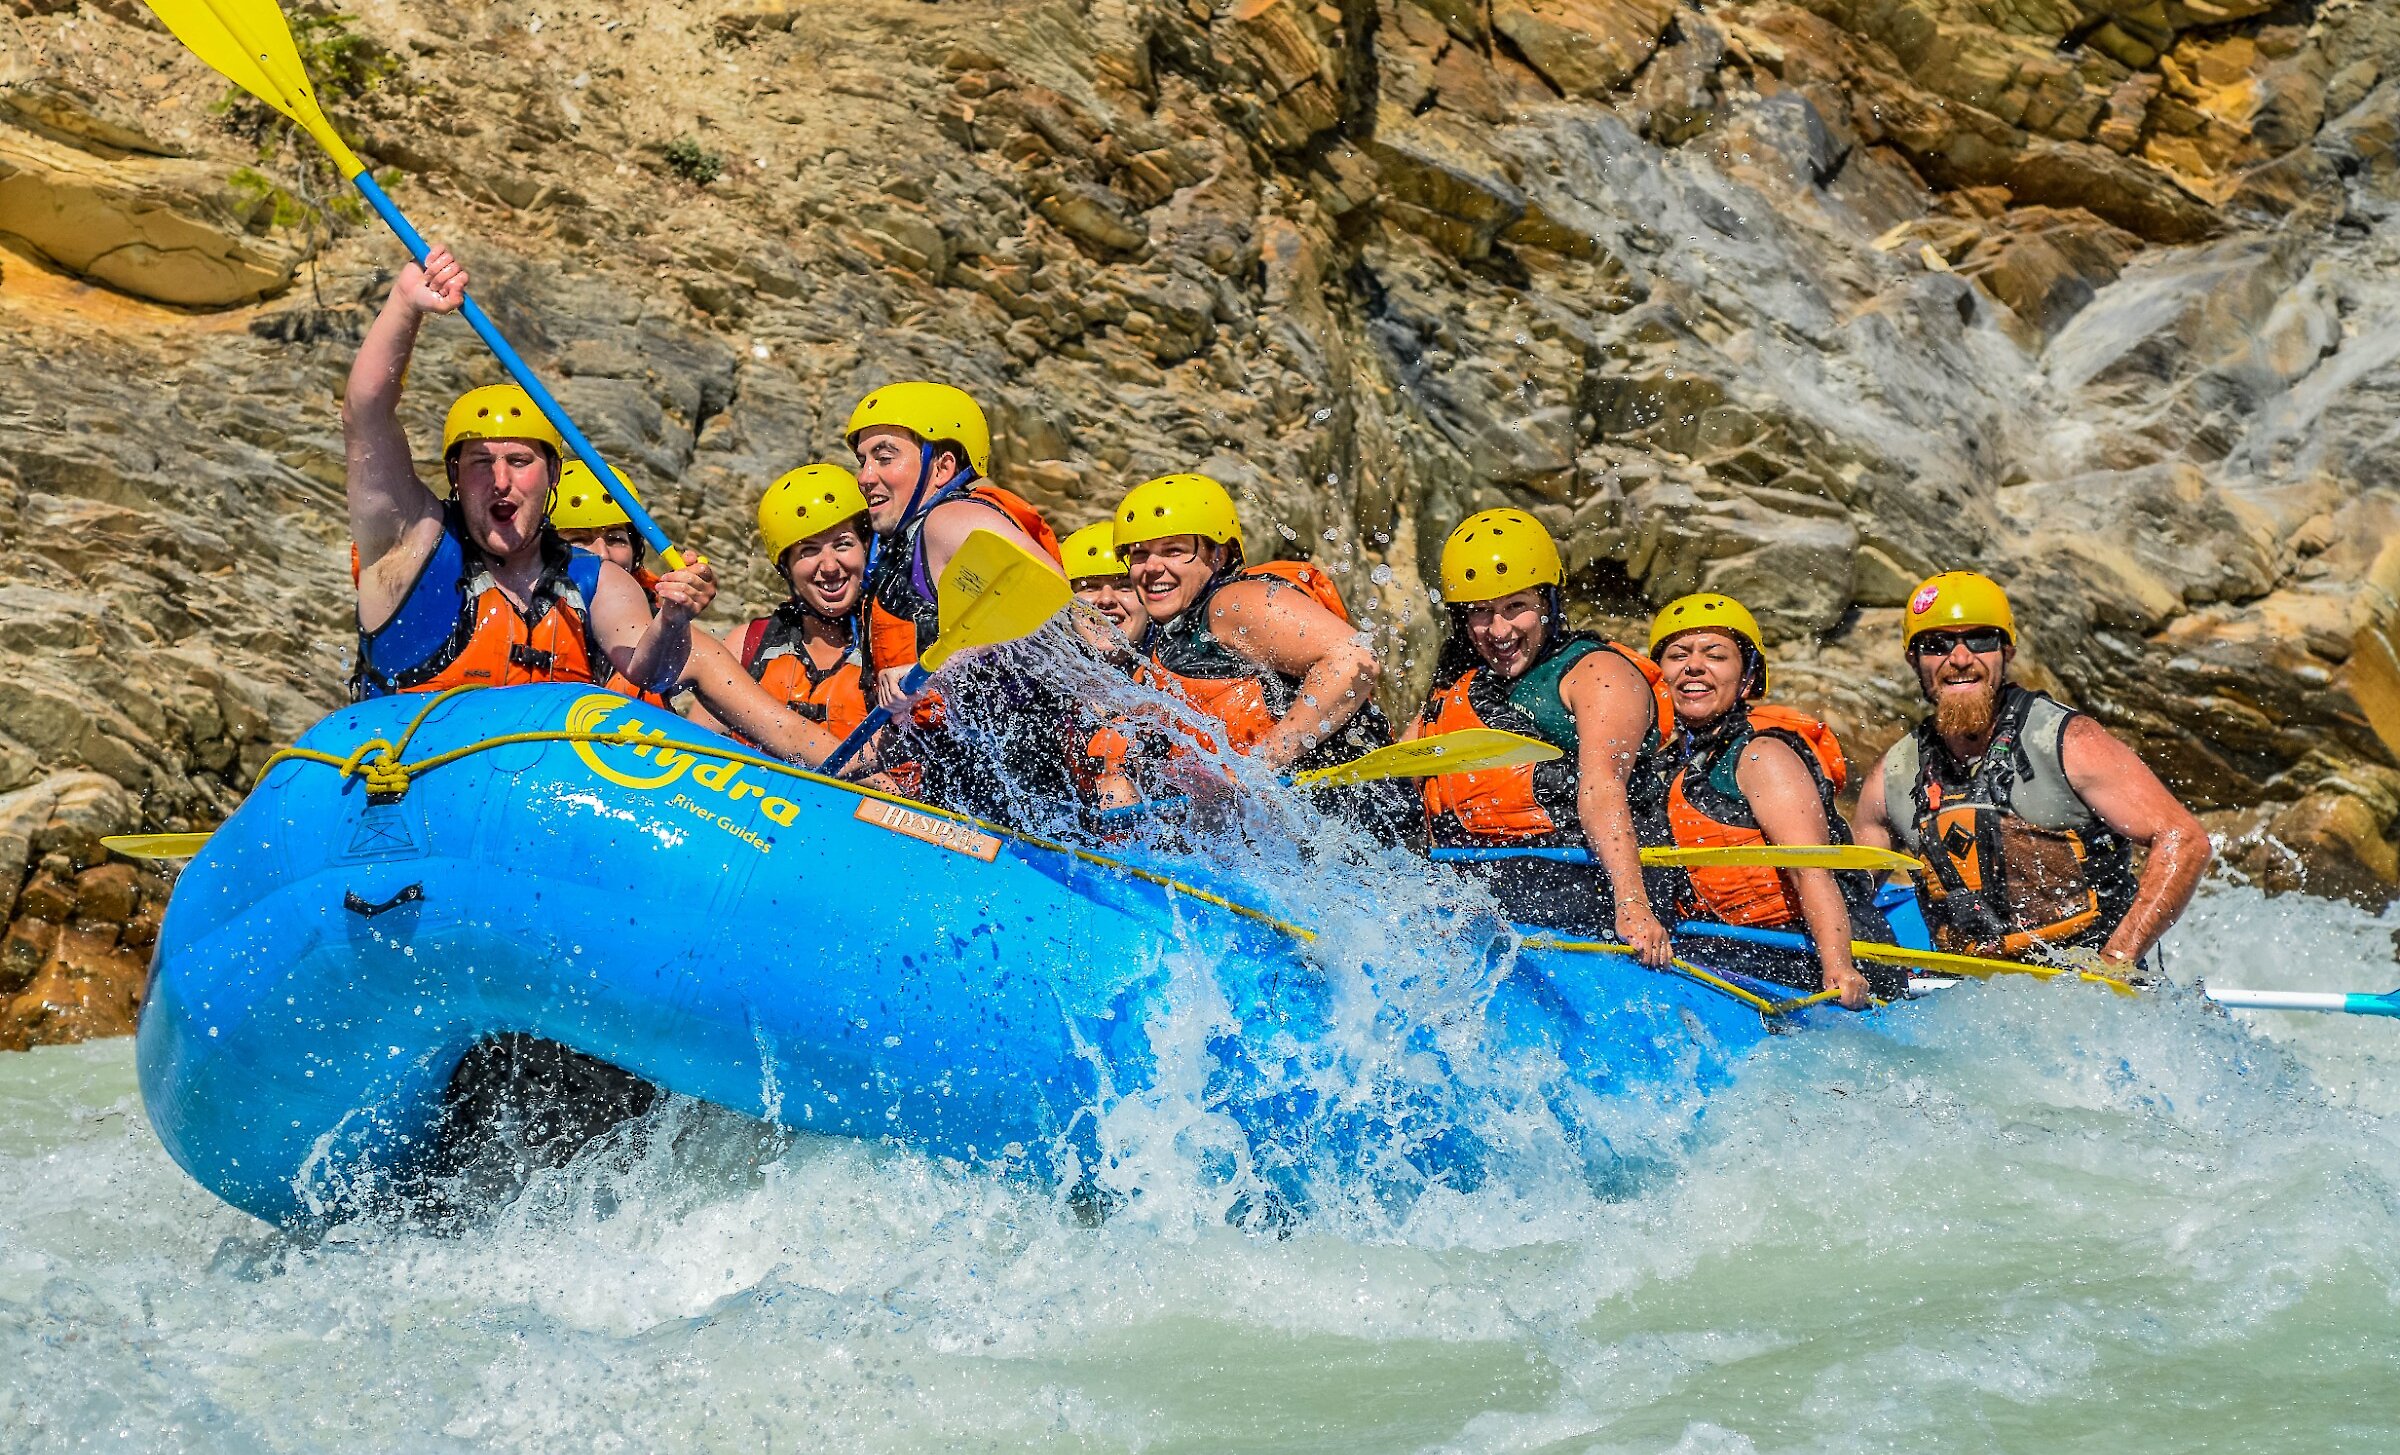 Rafting on the Kicking Horse River